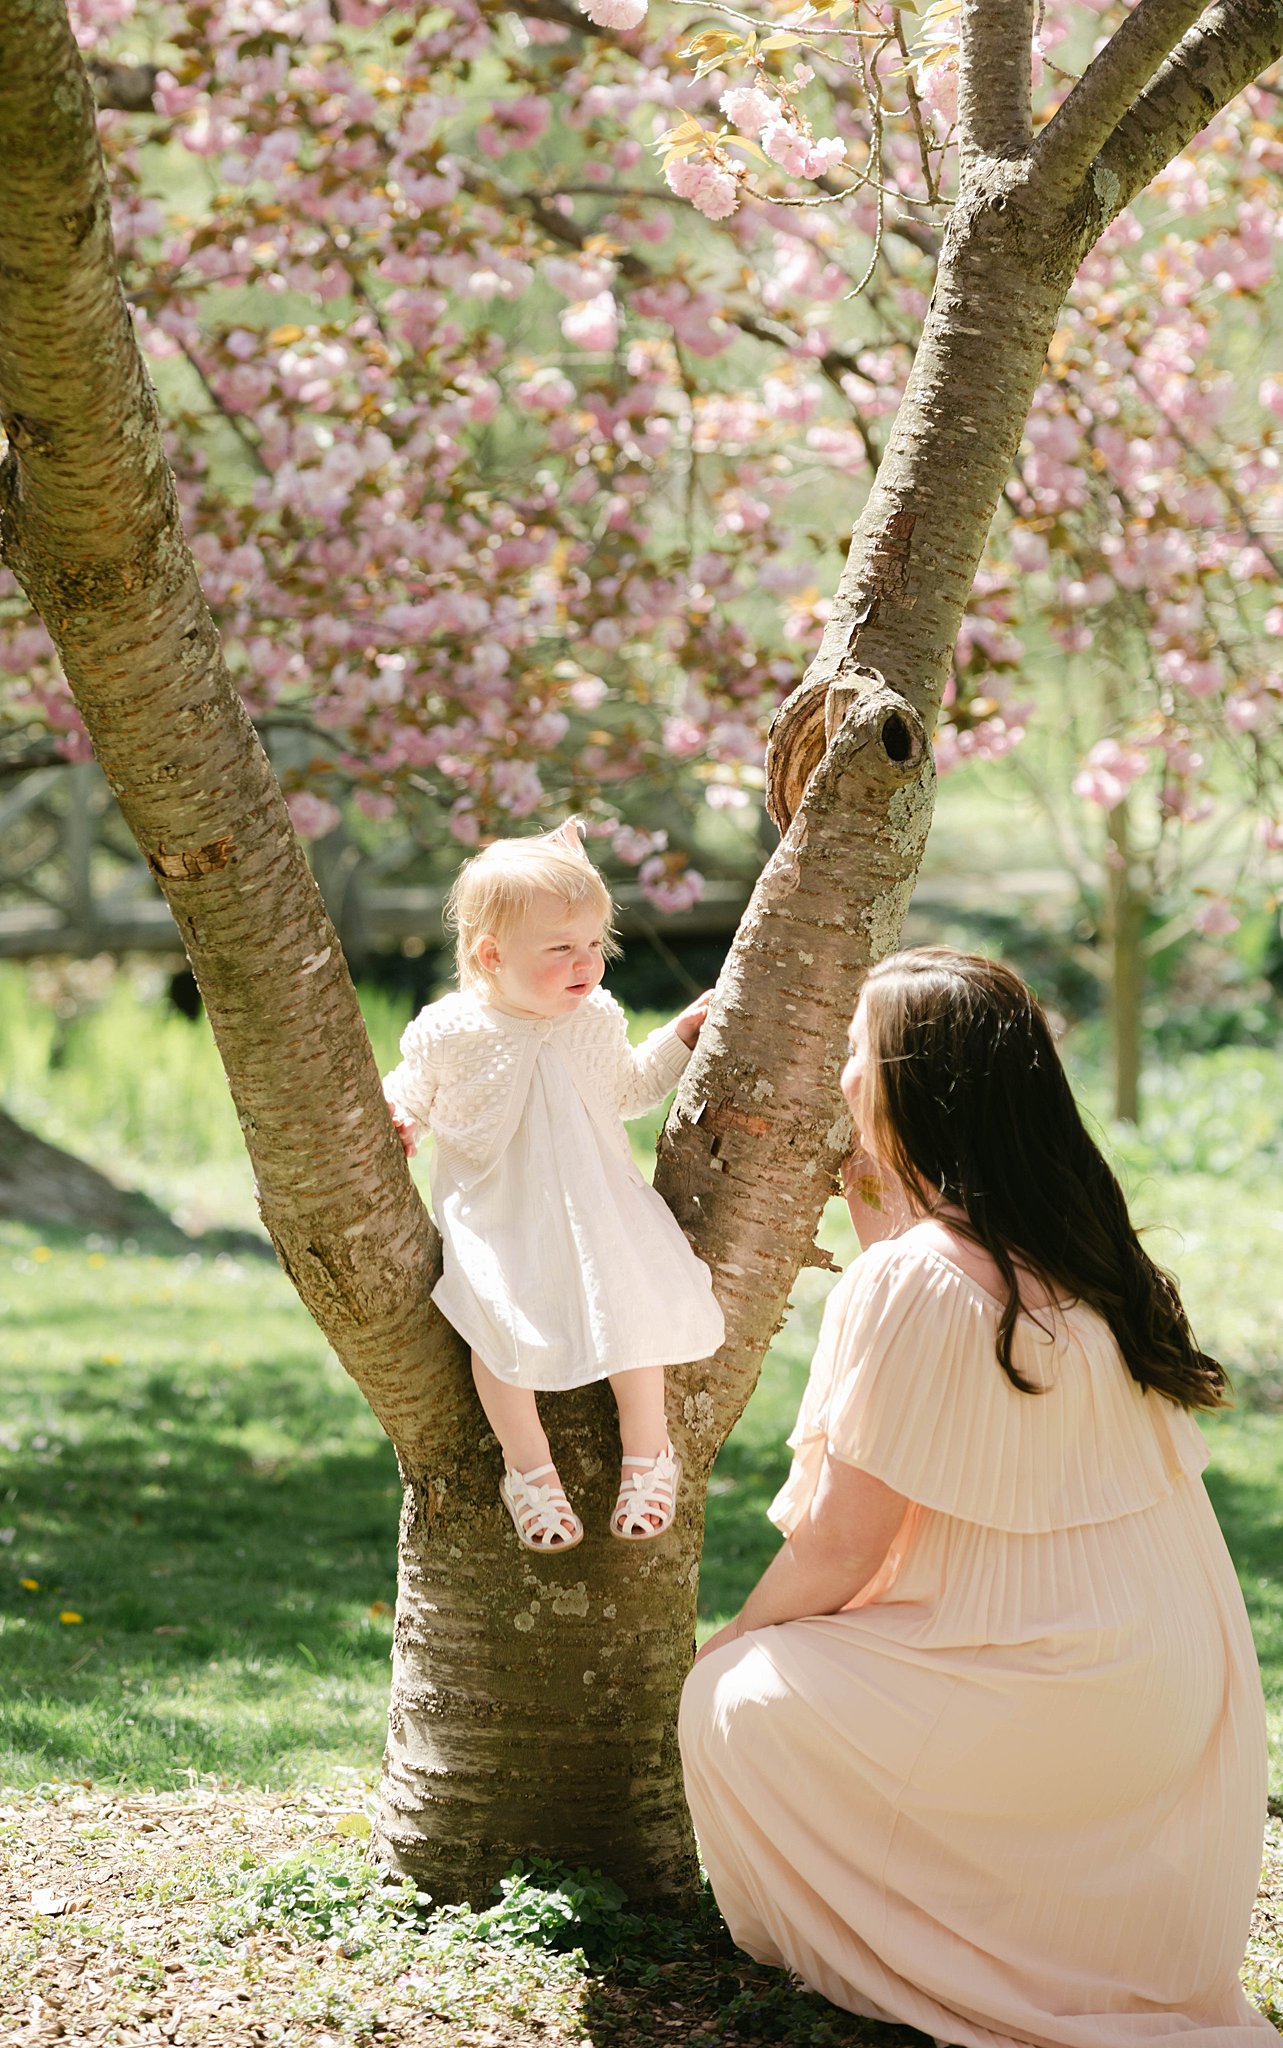 A young toddler sits in a tree in a white dress while mom kneels next to her kids 'n kribs